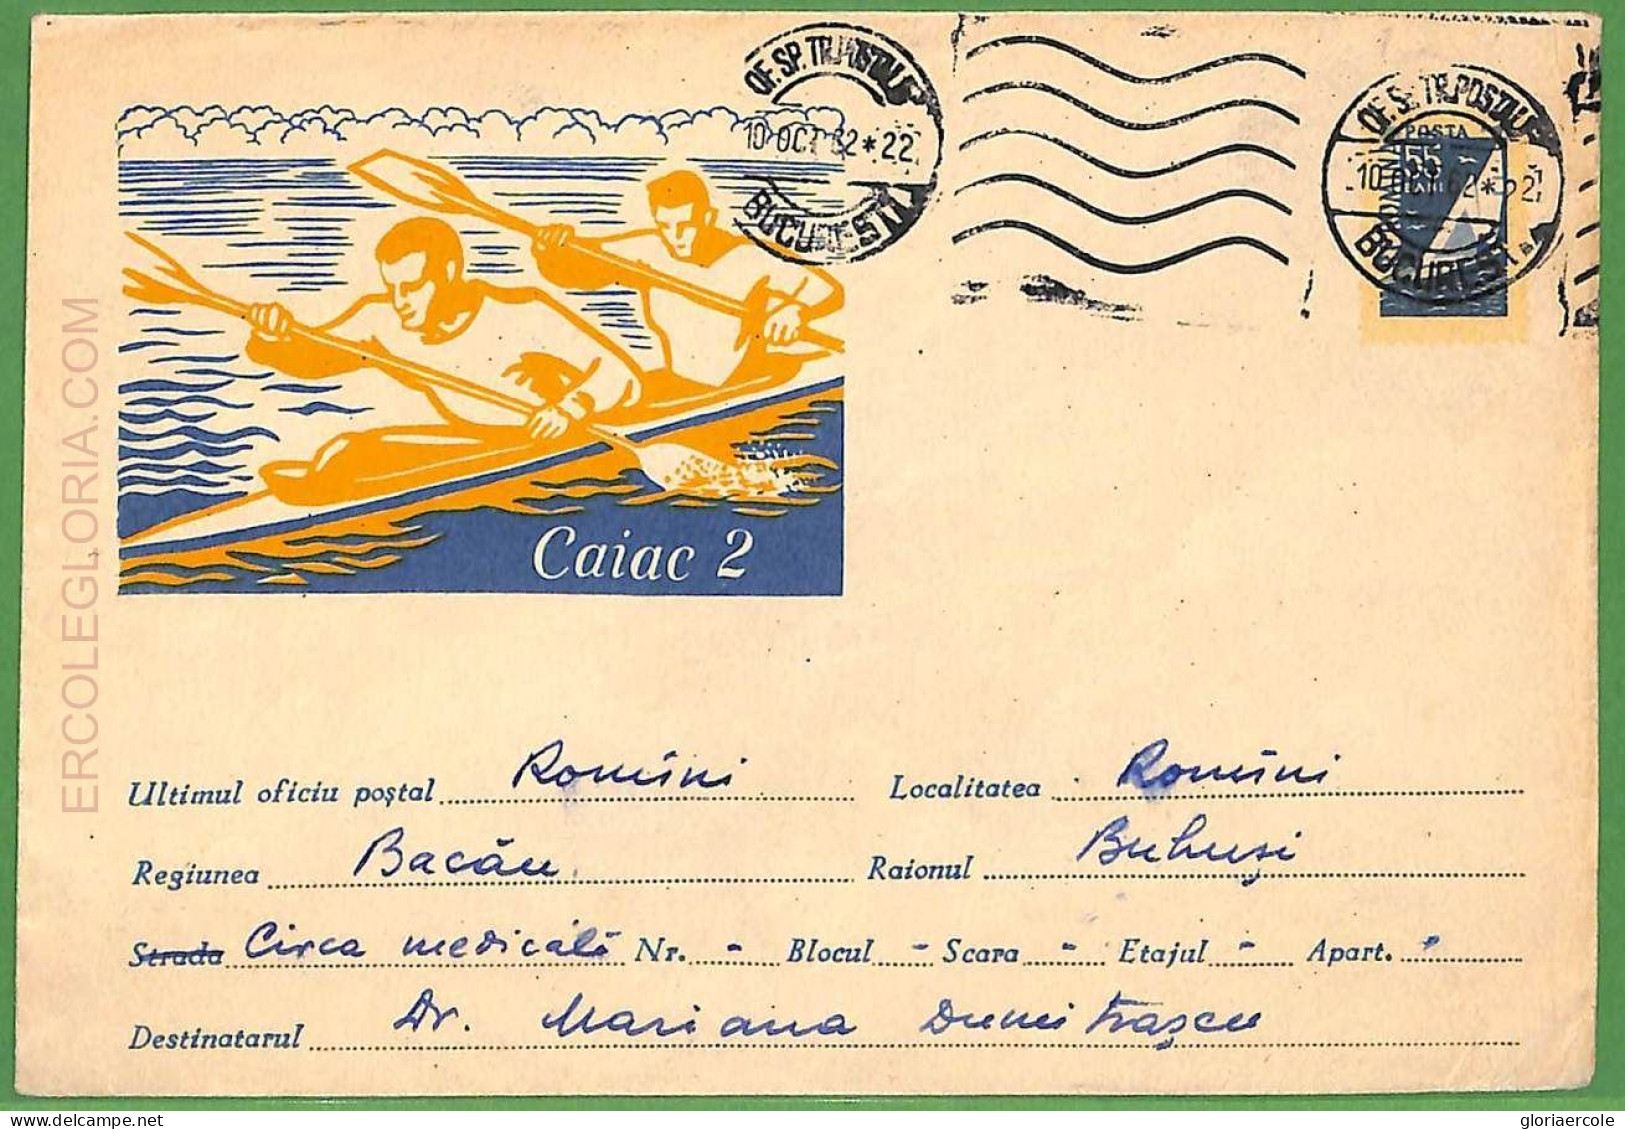 Af3772  - ROMANIA - POSTAL HISTORY -Postal Stationery Cover- ROWING Canoes-1962 - Canoa